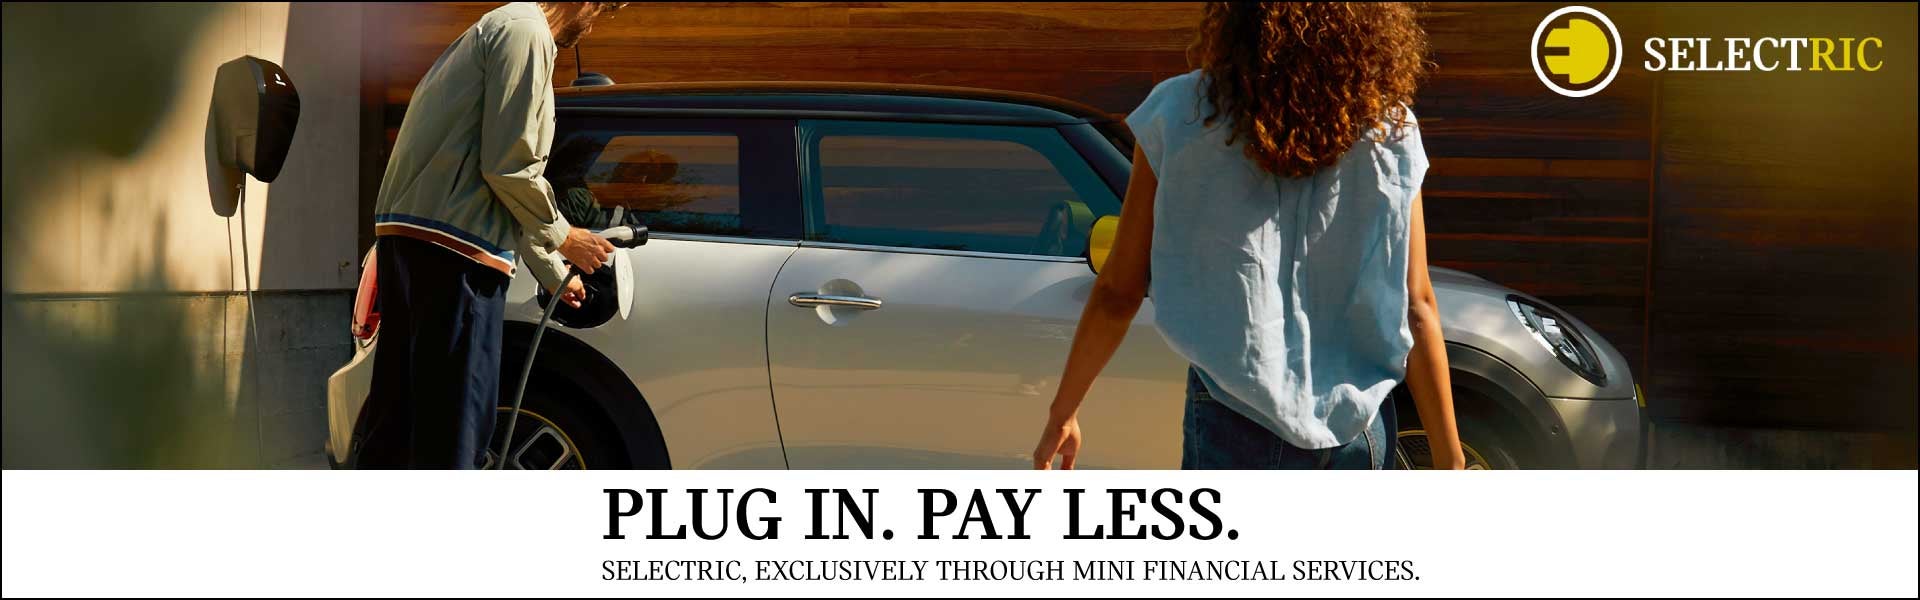 PLUG IN. PAY LESS. SELECTRIC, THROUGH MINI FINANCIAL SERVICE